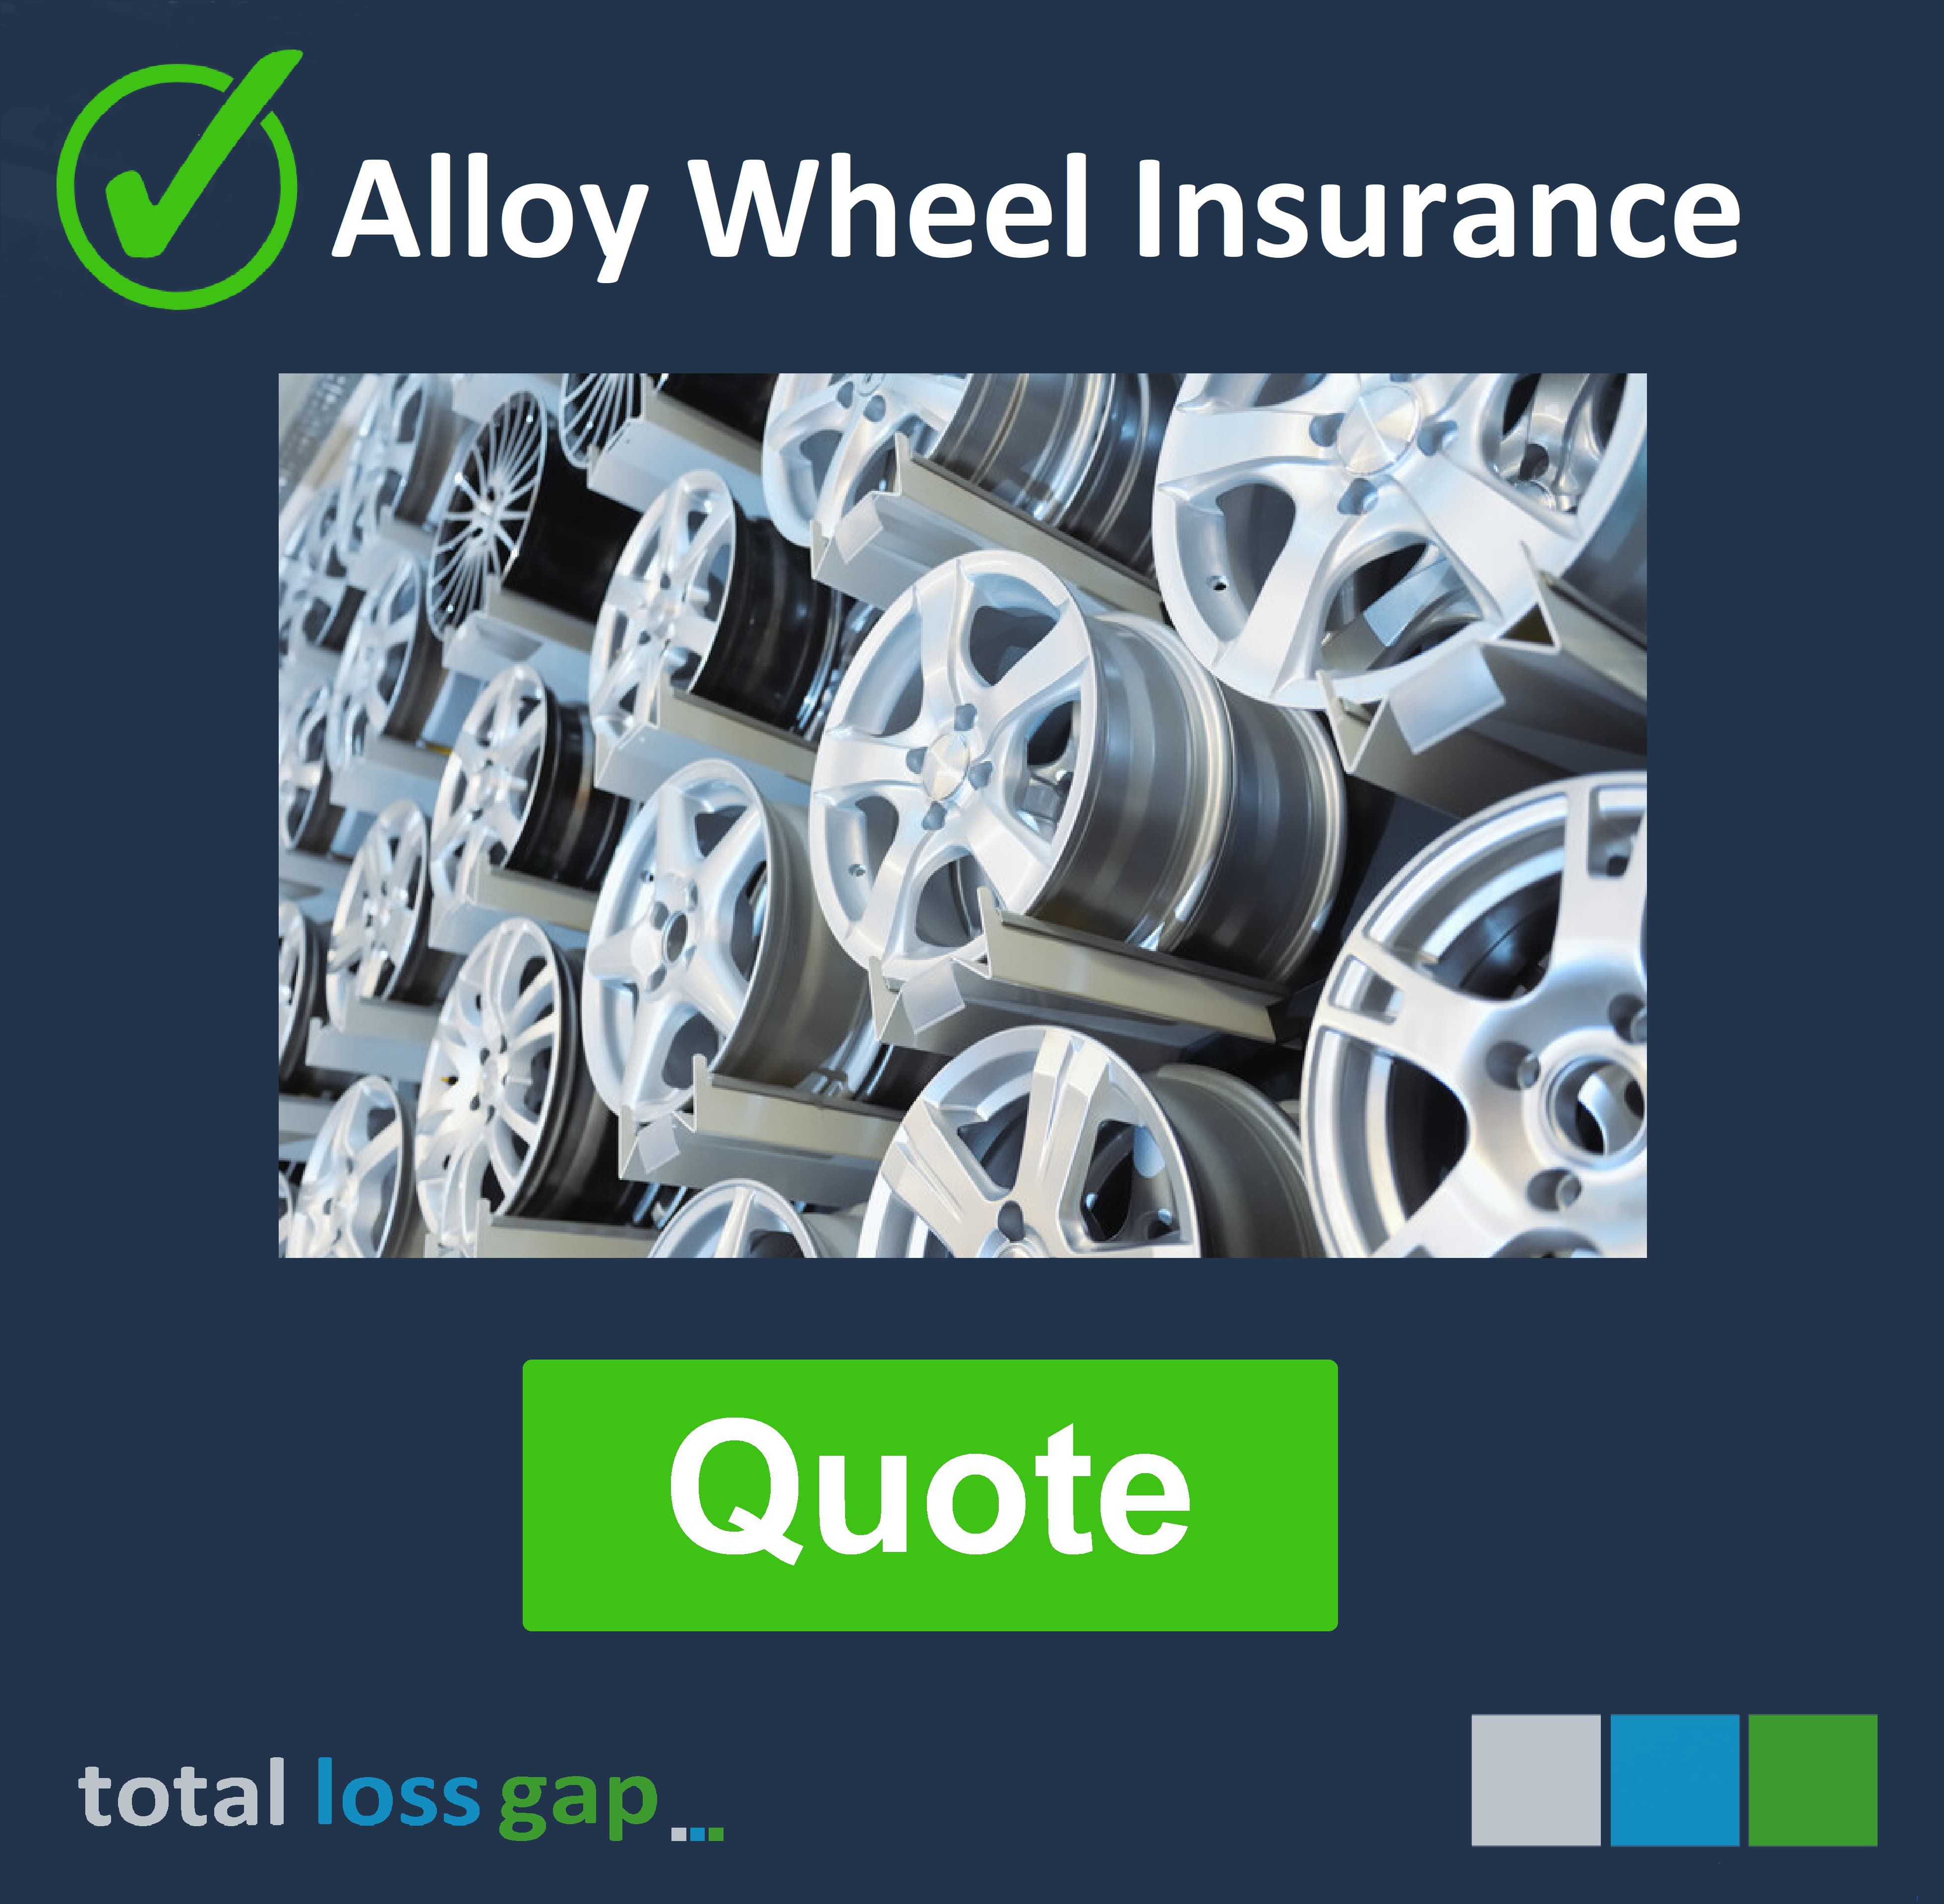 Alloy Wheel Insurance for your vehicle